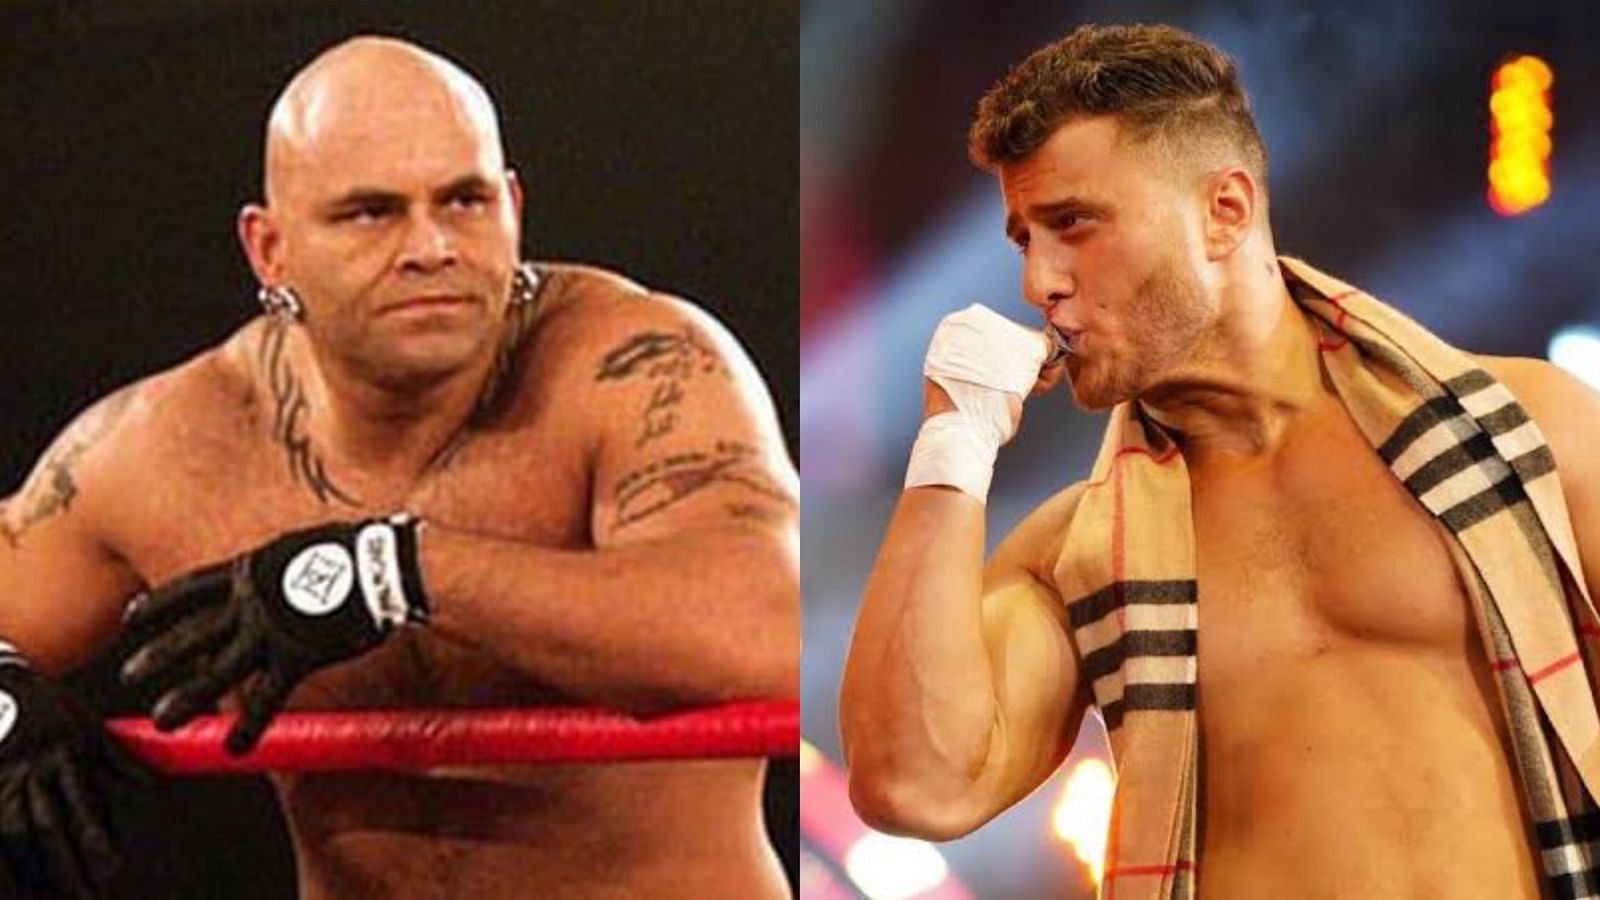 Konnan believes MJF is a better fit for WWE than current SmackDown Star